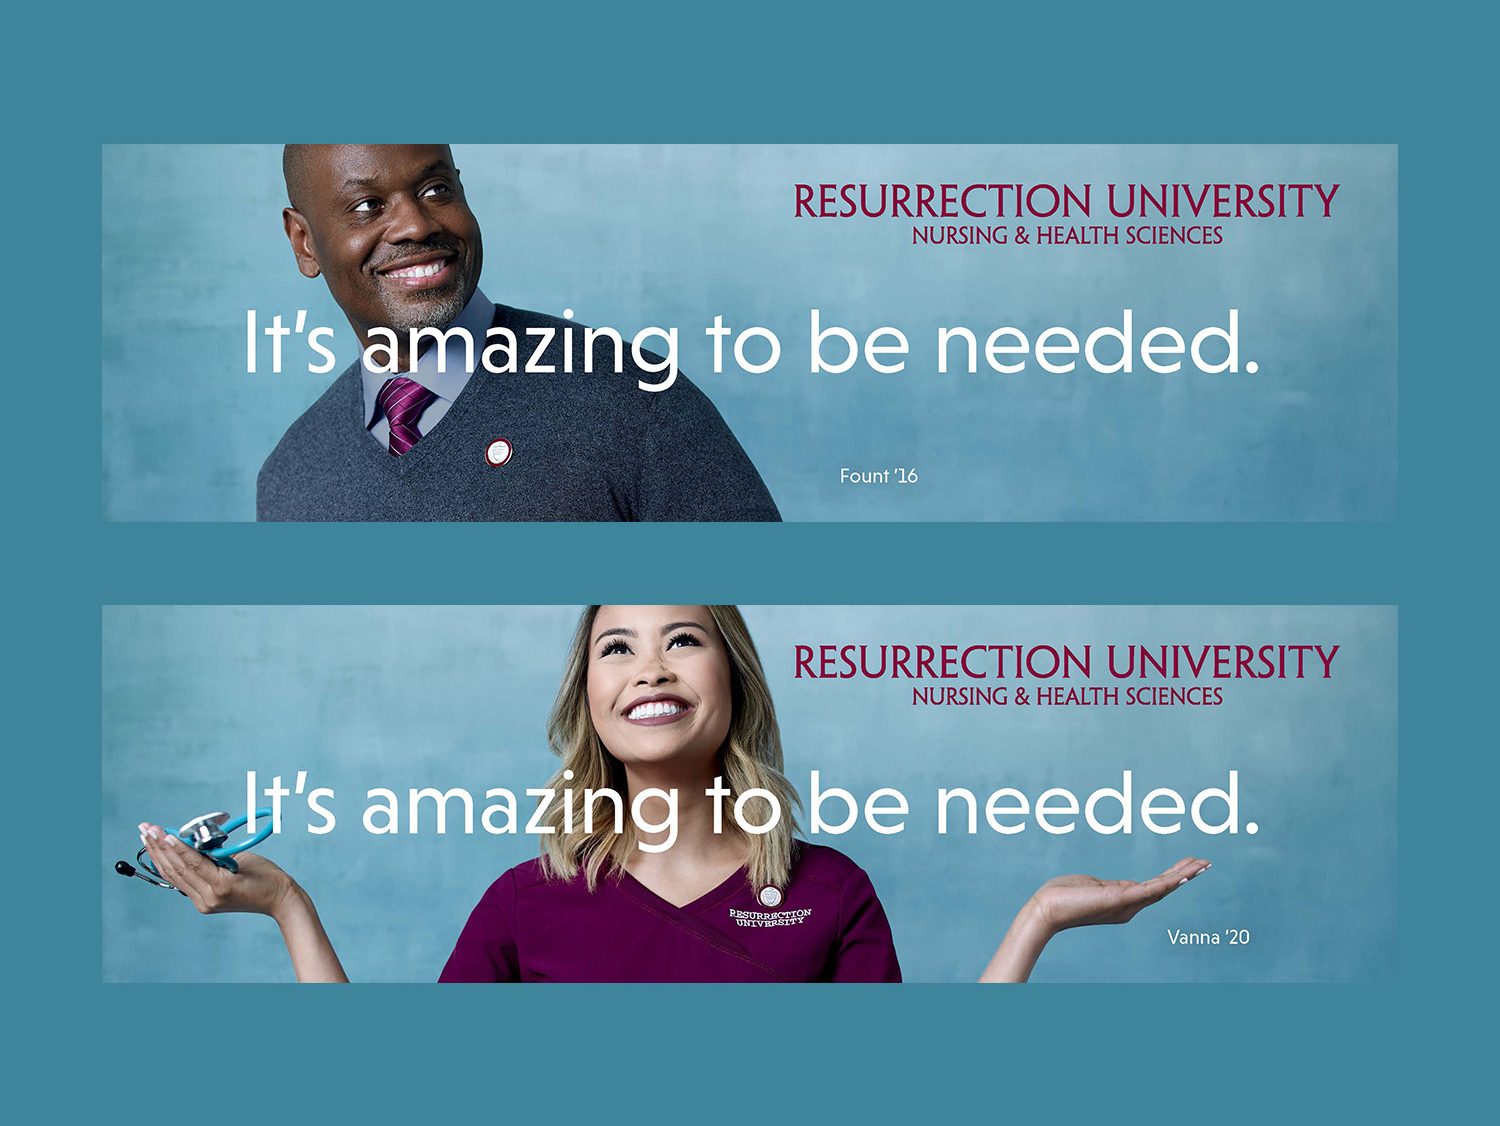 Alternate versions of It's amazing to be needed billboards. Subjects are a black man in a shirt, tie, and sweater, and an Asian woman in scrubs.